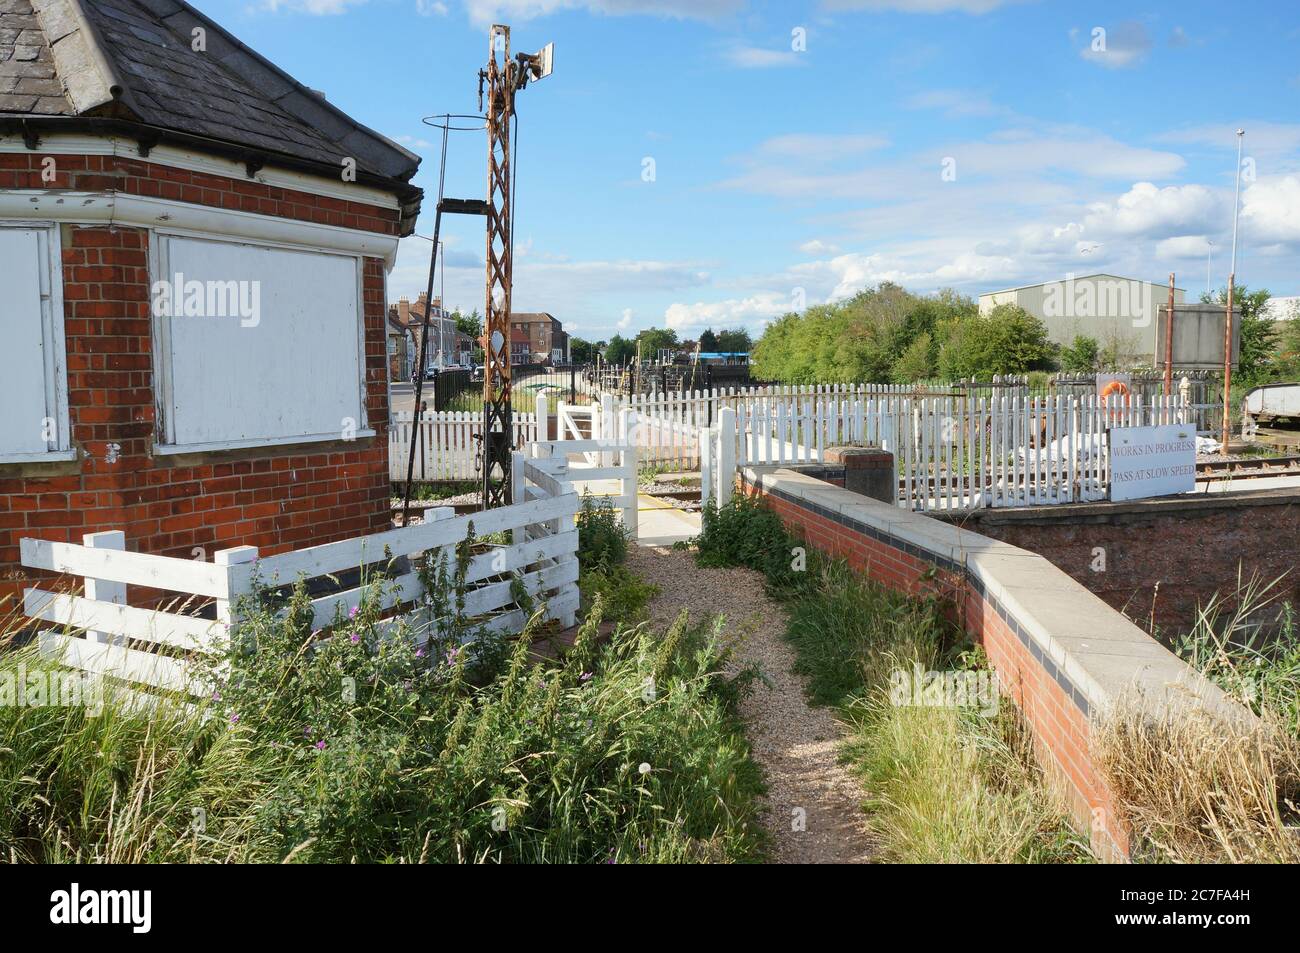 old signal box on the railway line in the high street Stock Photo